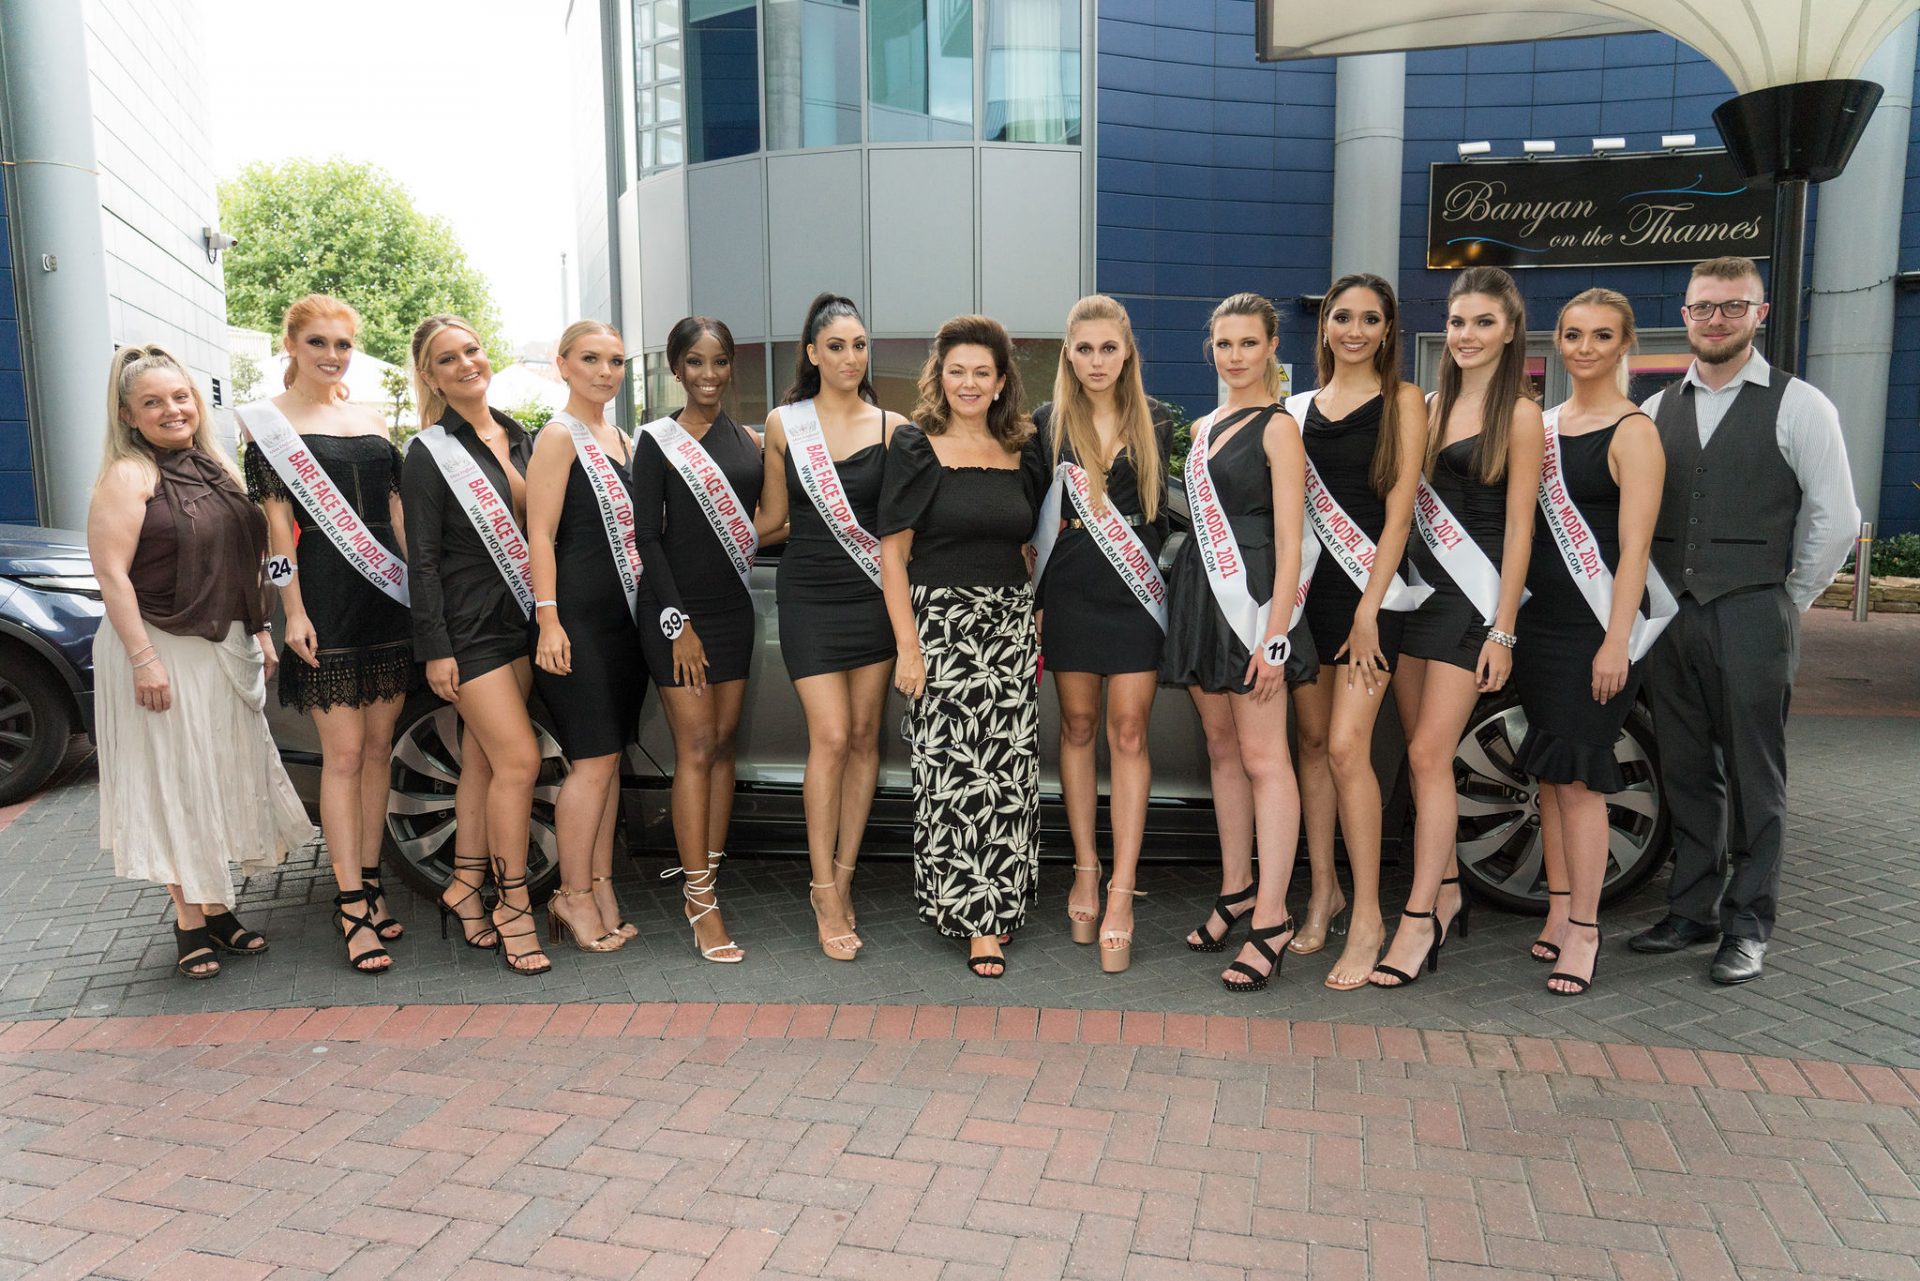 Lincolnshire Marketing Agency supporting Miss England